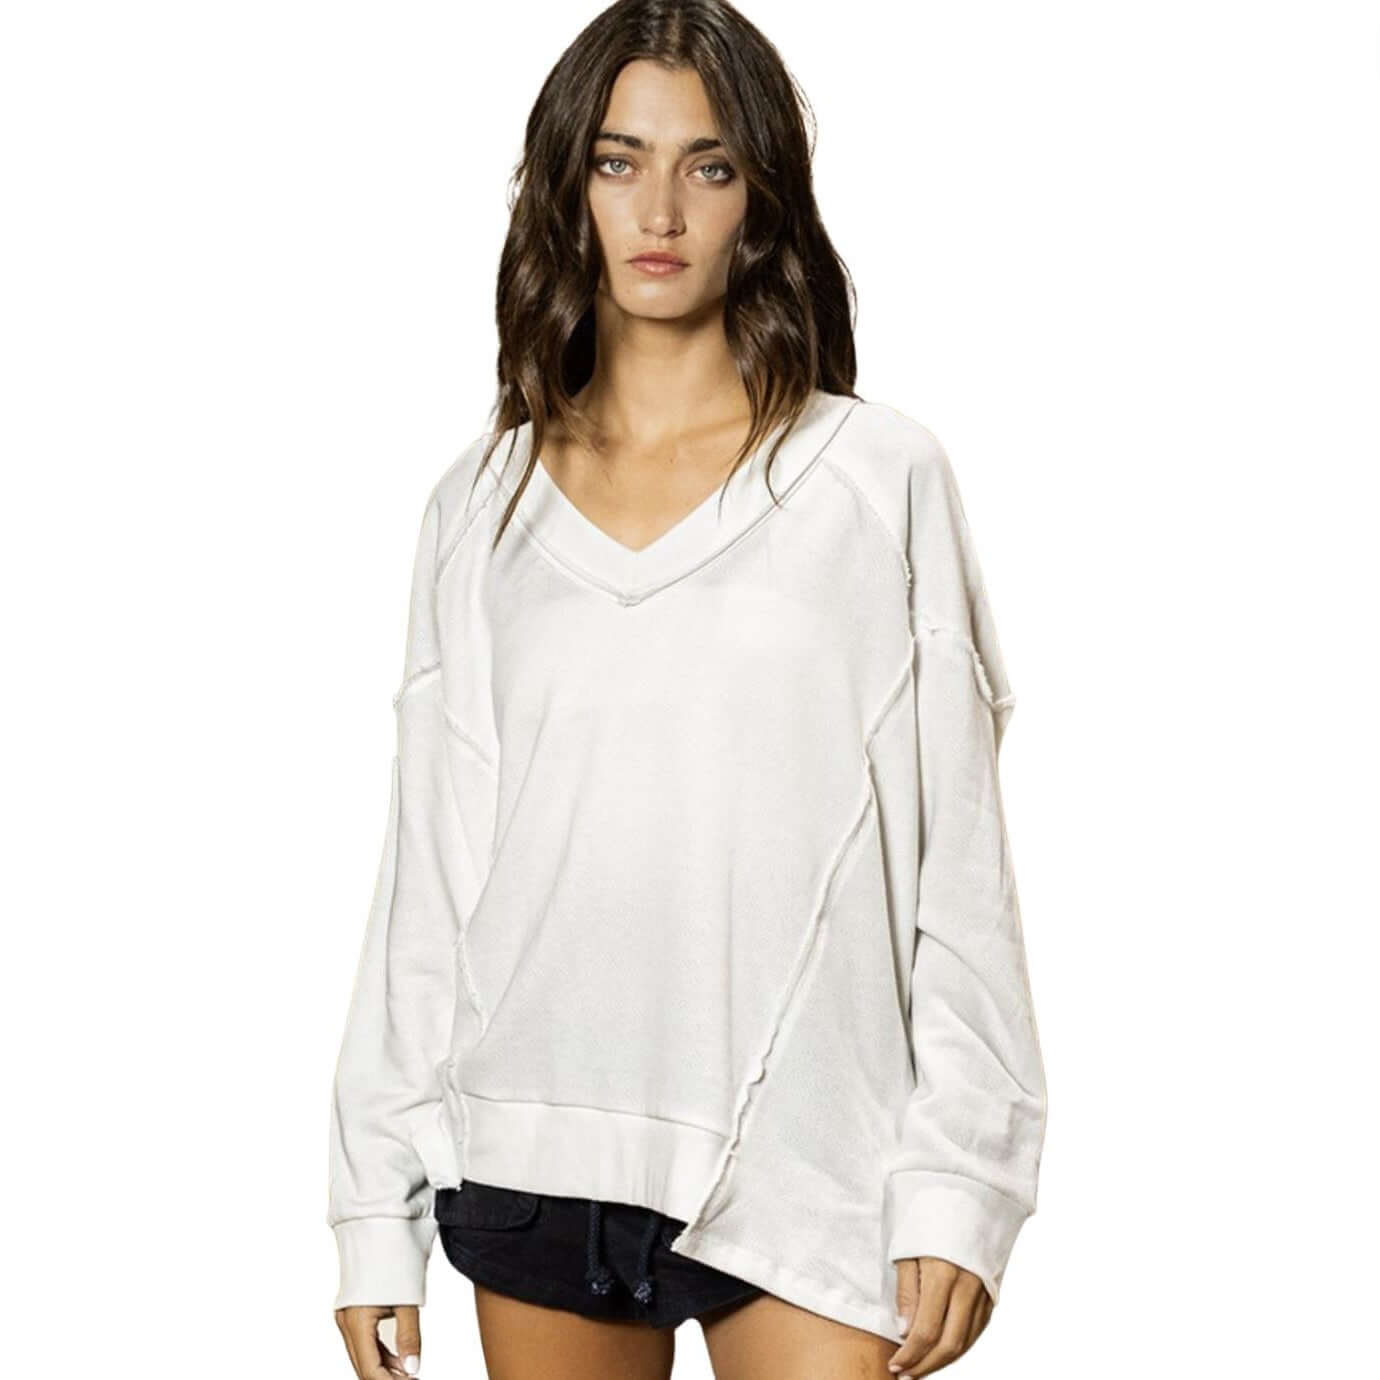 USA Made Women's Oversized Drop Shoulder Cut Out Hem Sweatshirt with Raw Edge Detail in White | Bucket List Clothing Style T2060 | Classy Cozy Cool Made in America Boutique